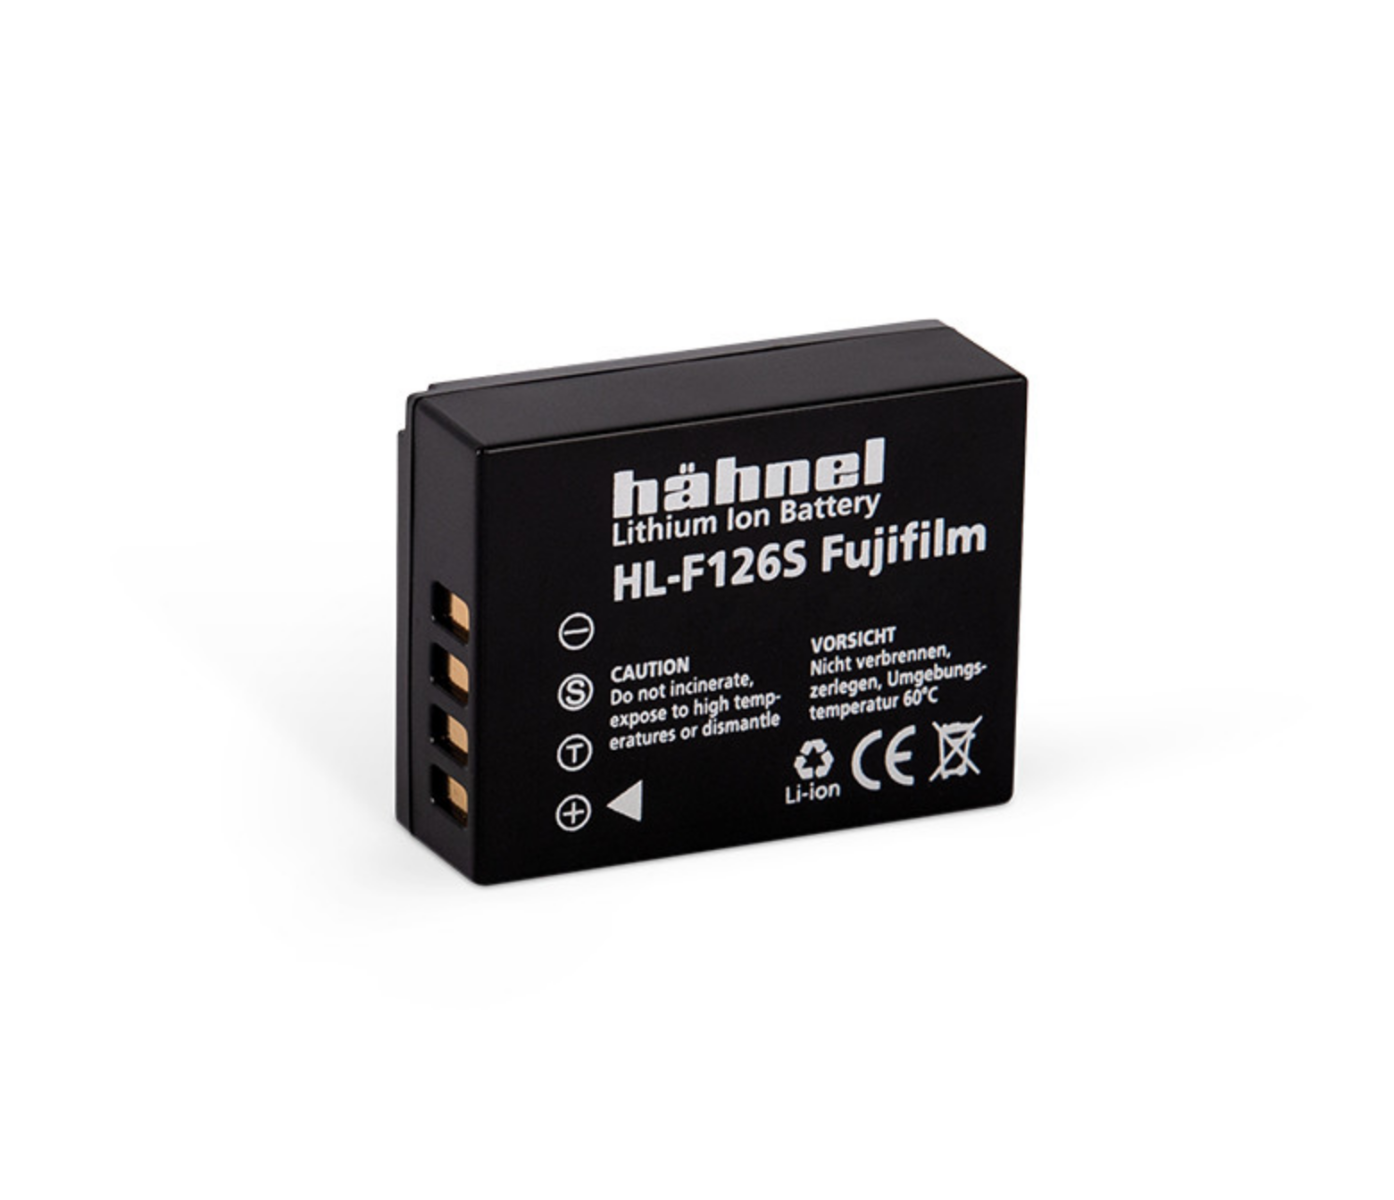 Hahnel HL-F126 Li ion Replacement Battery for Fujifilm NP-W126